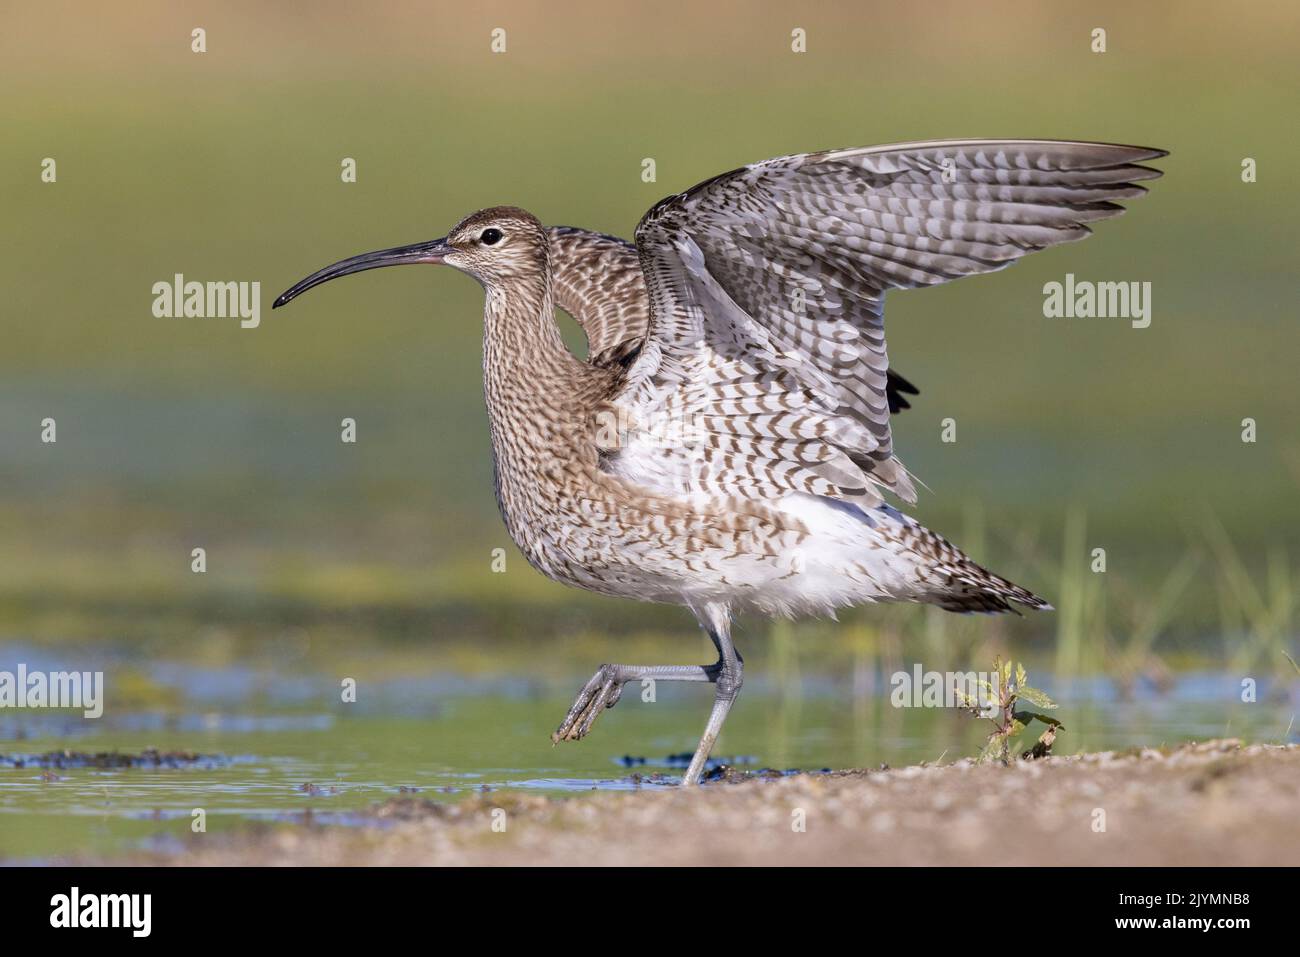 Eurasian Whimbrel (Numenius phaeopus), side view of an adult spreading its wings, Campania, Italy Stock Photo